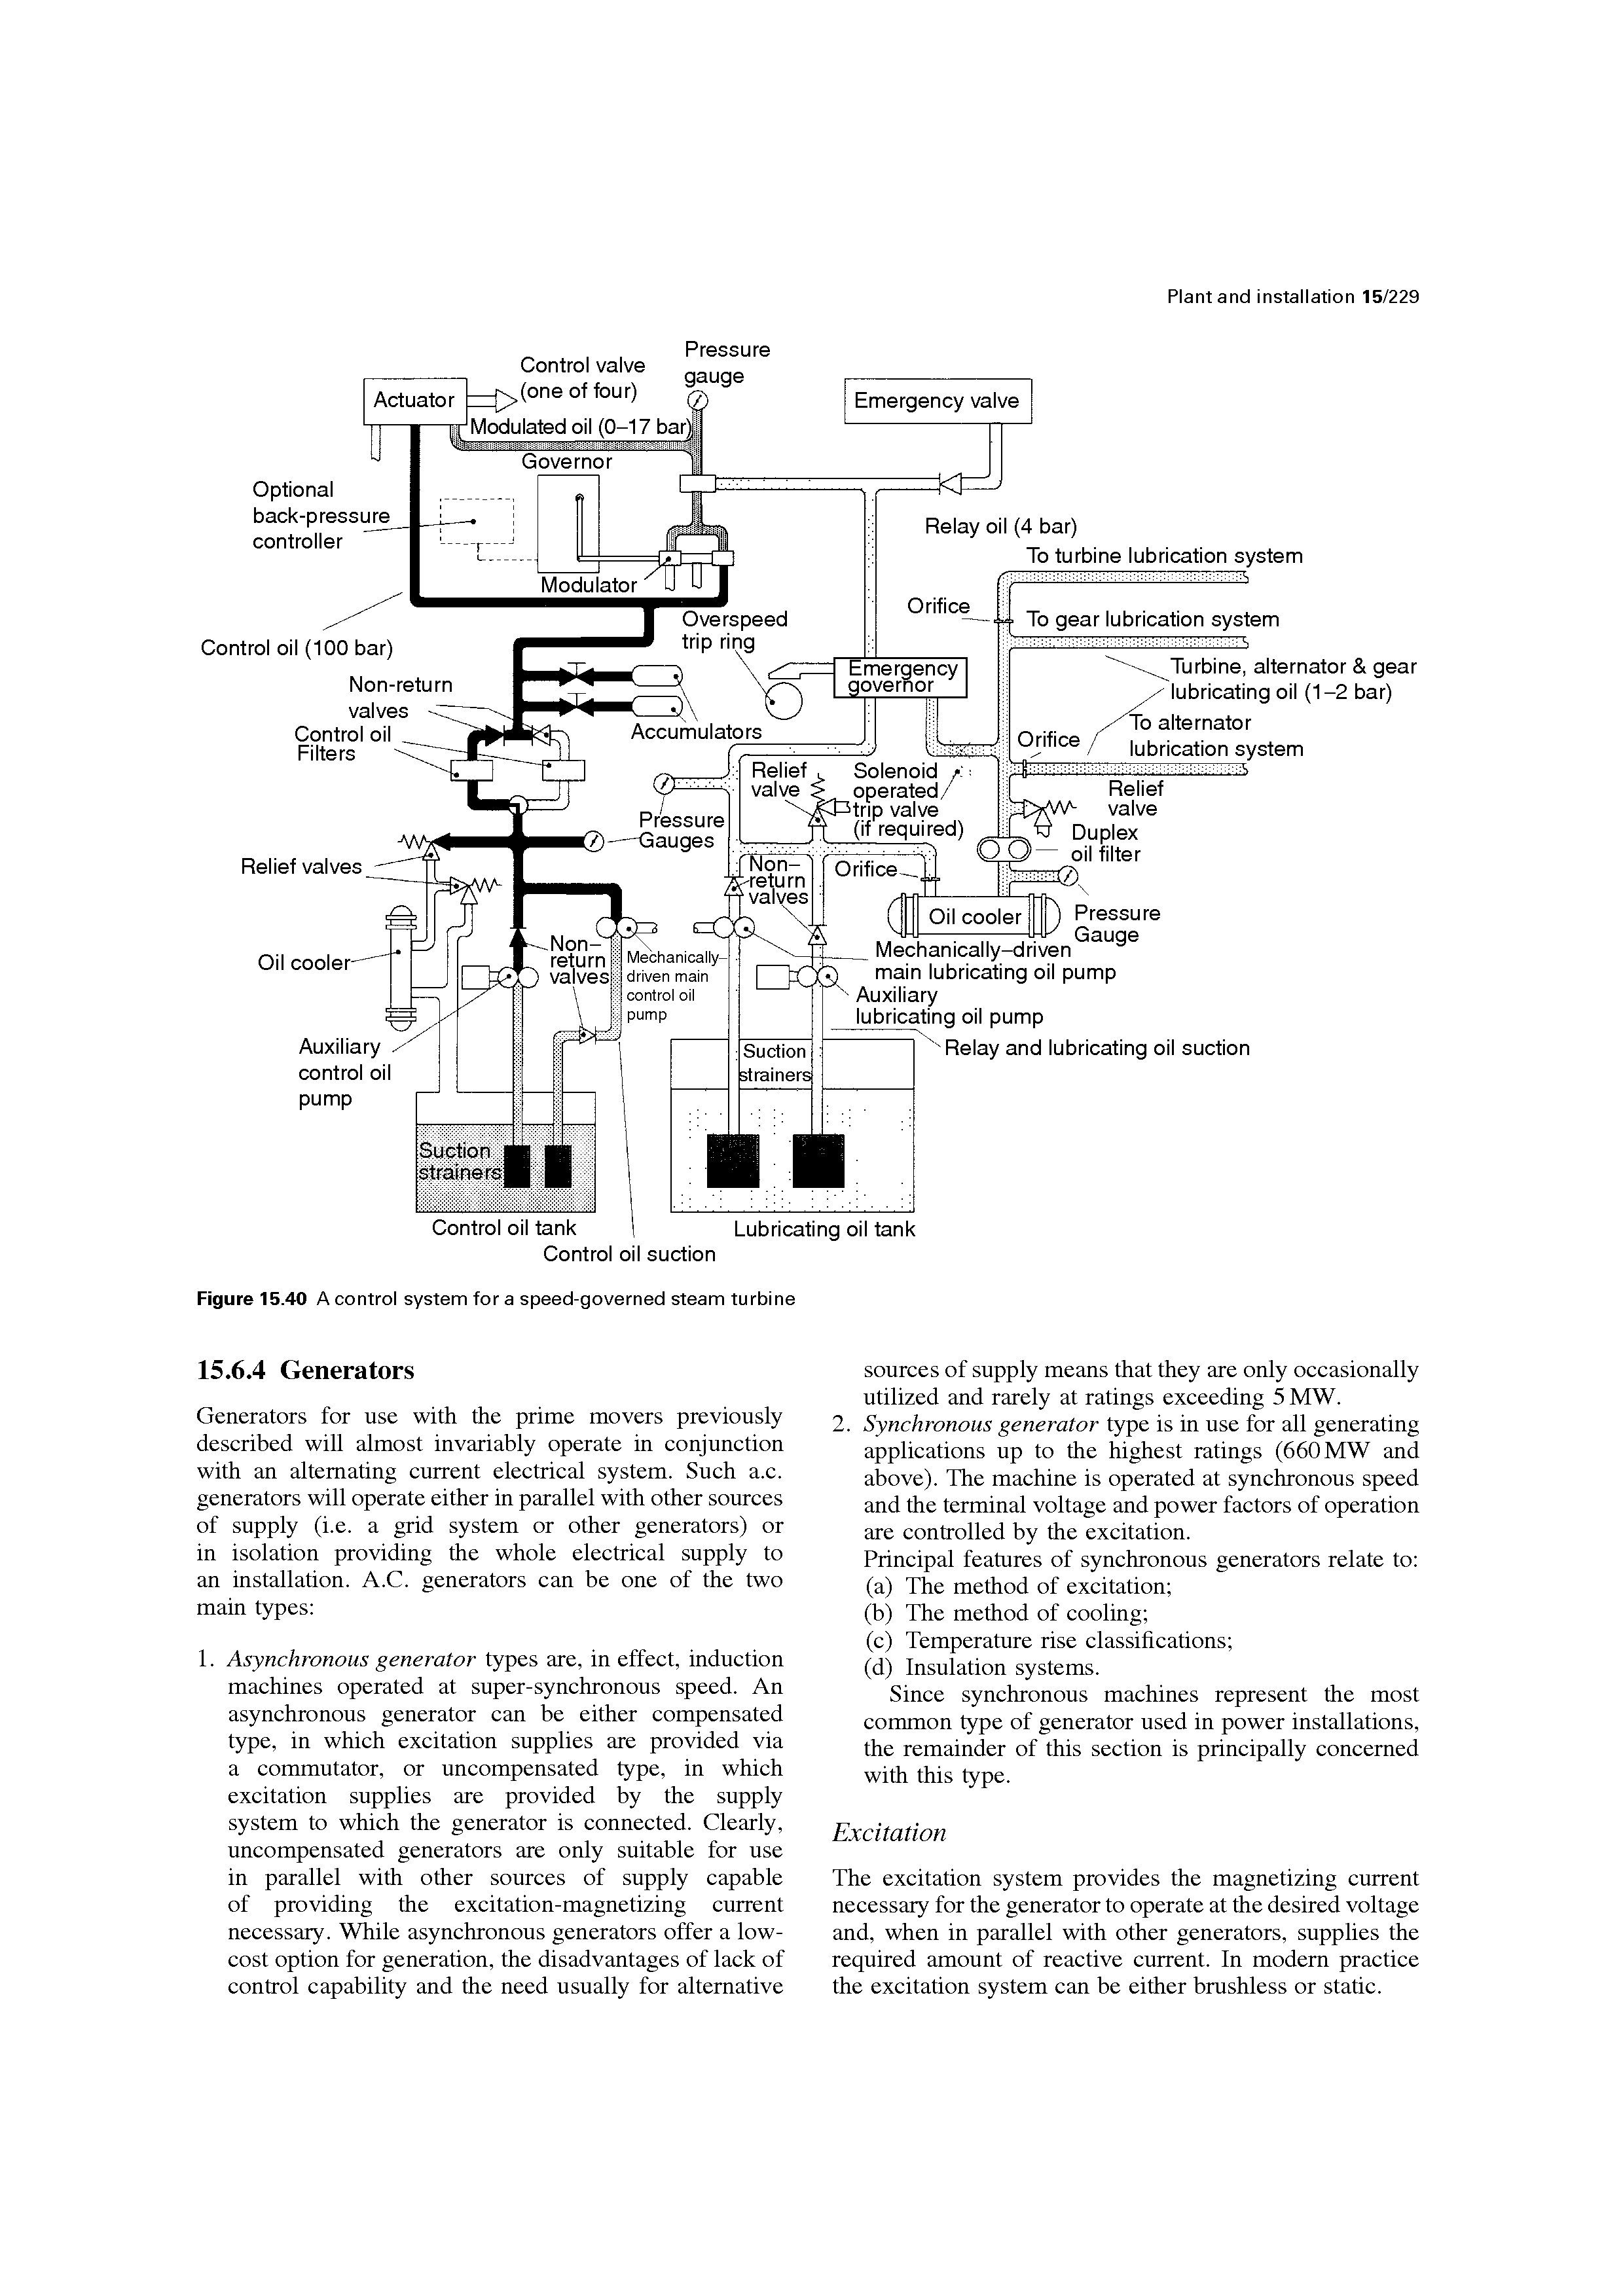 Figure 15.40 A control system for a speed-governed steam turbine...